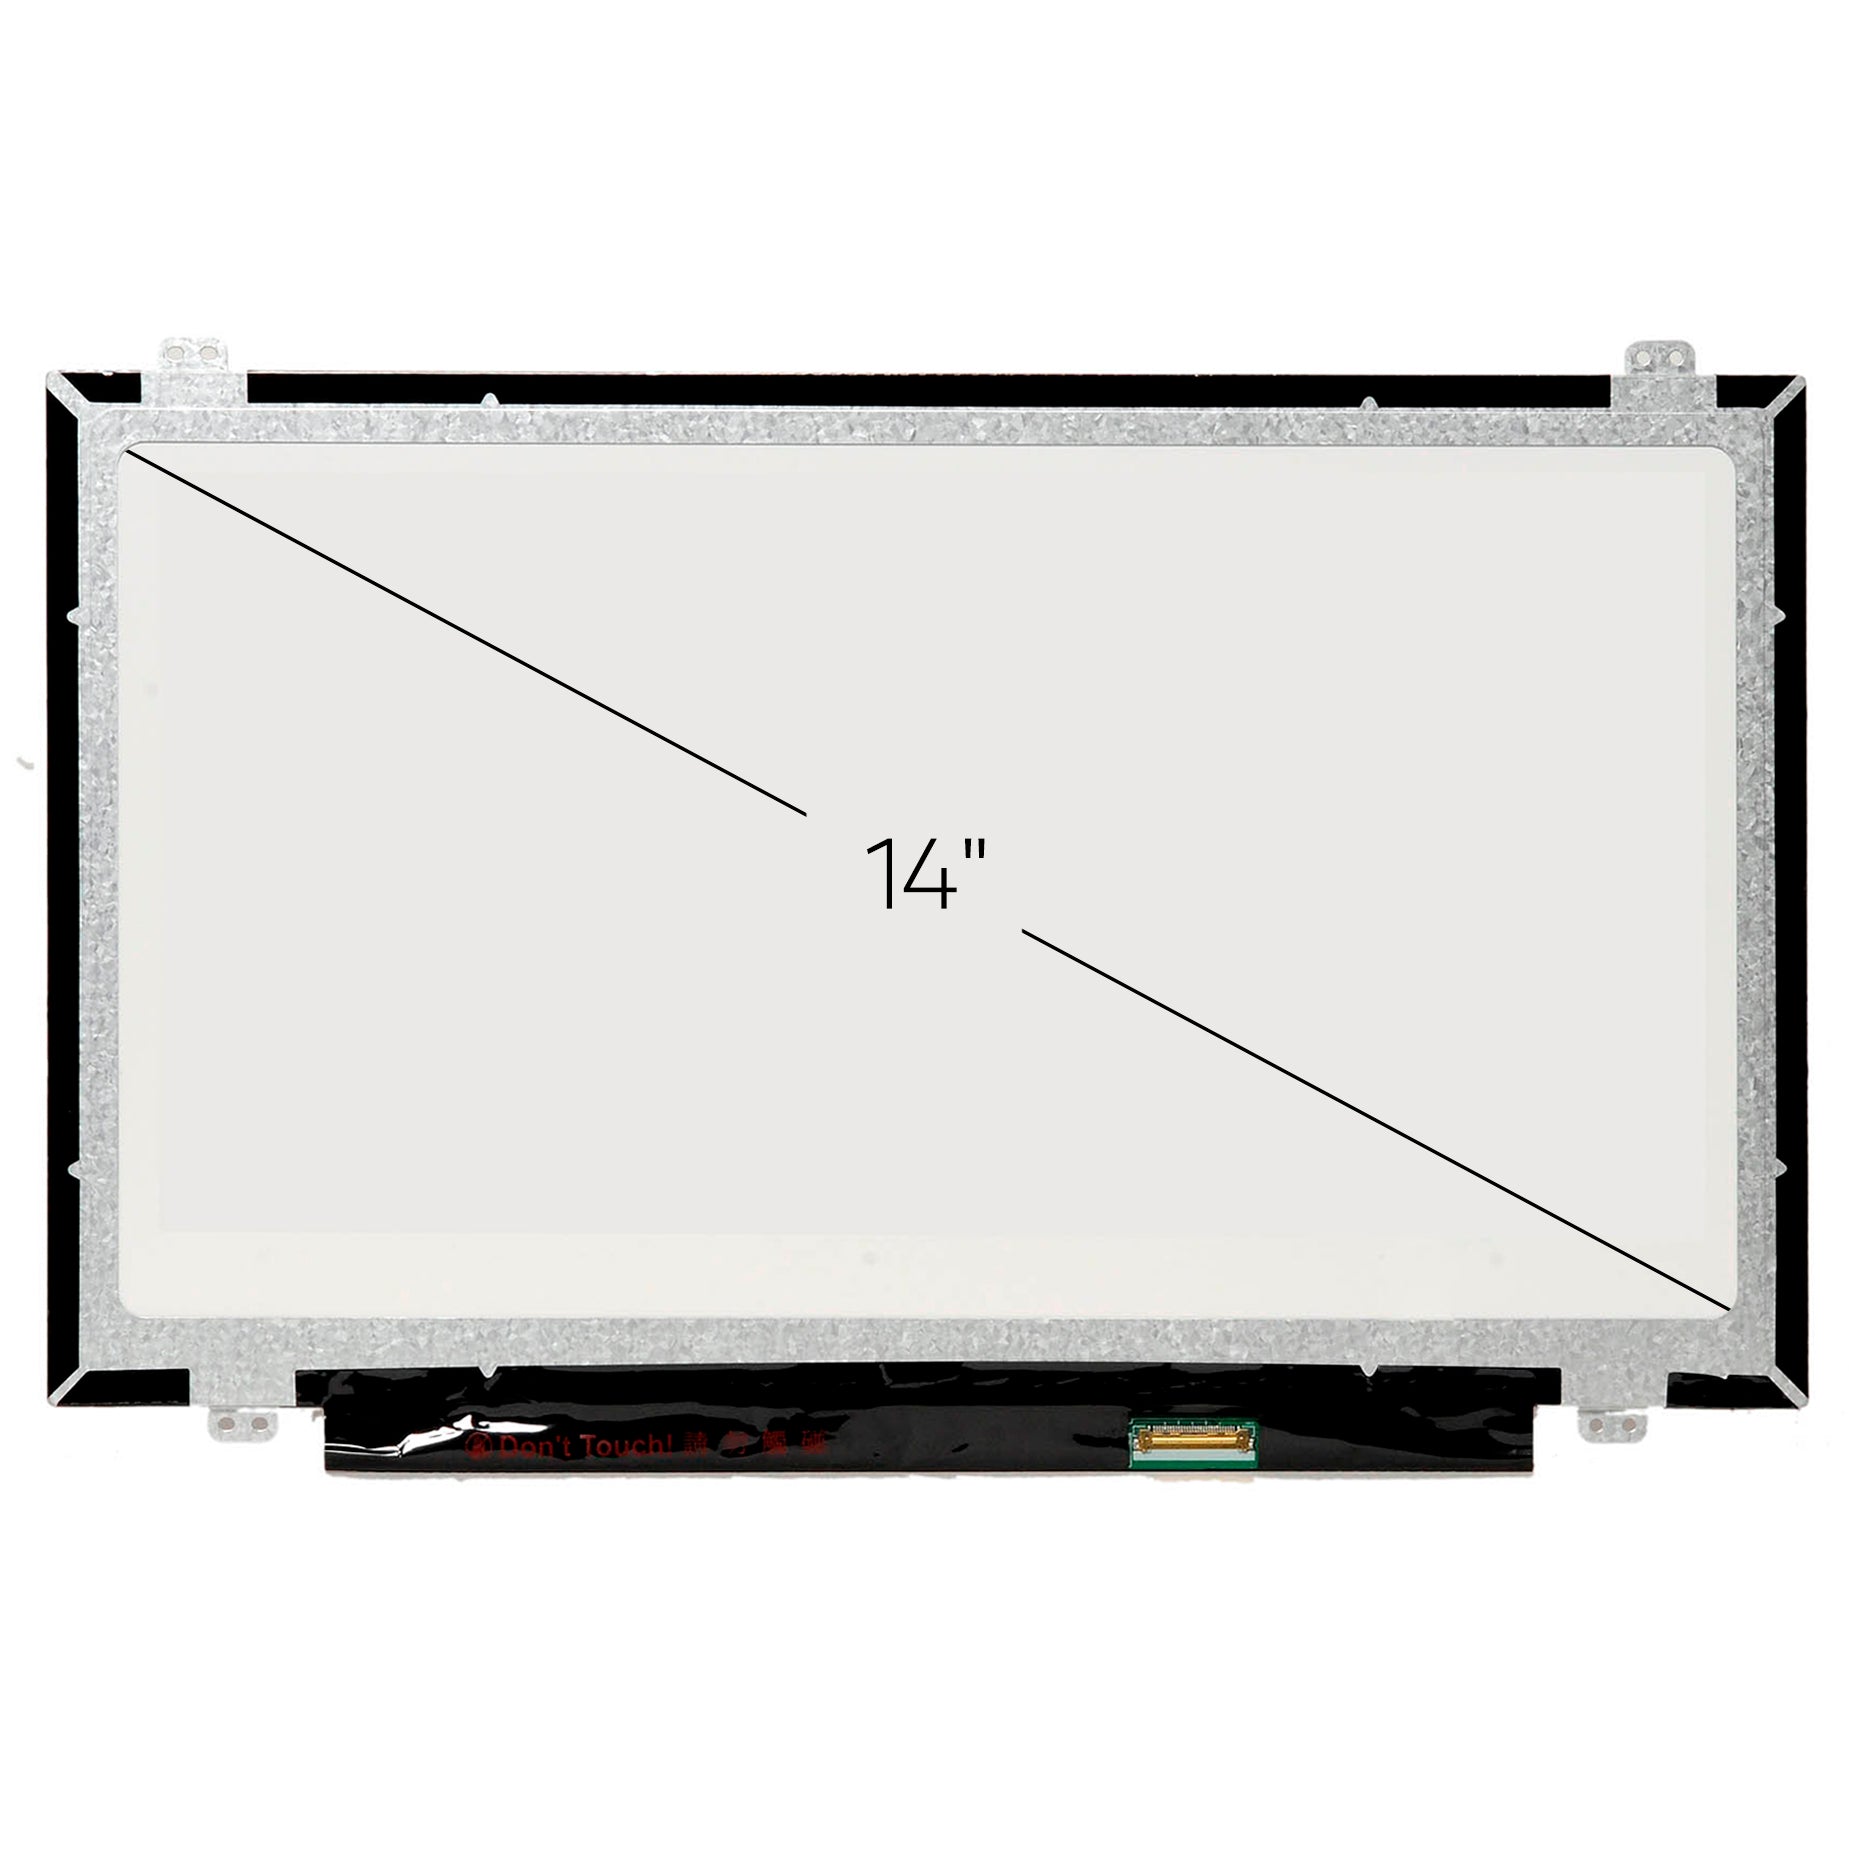 Screen Replacement for HP P/N 847664-005 HD 1366x768 Glossy LCD LED Display